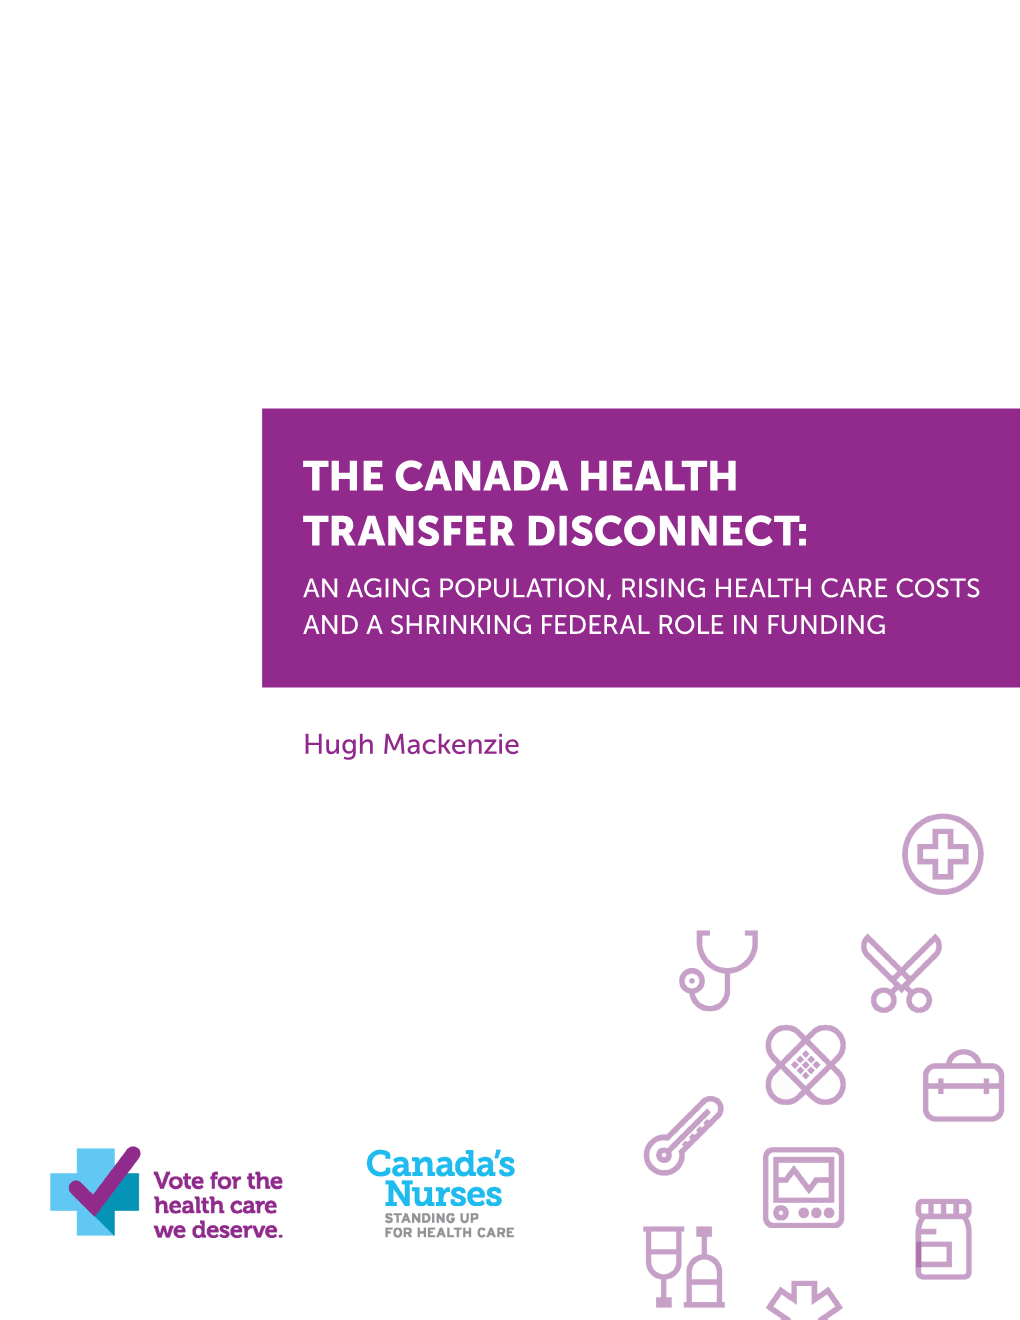 The Canada Health Transfer Disconnect: an Aging Population, Rising Health Care Costs and a Shrinking Federal Role in Funding